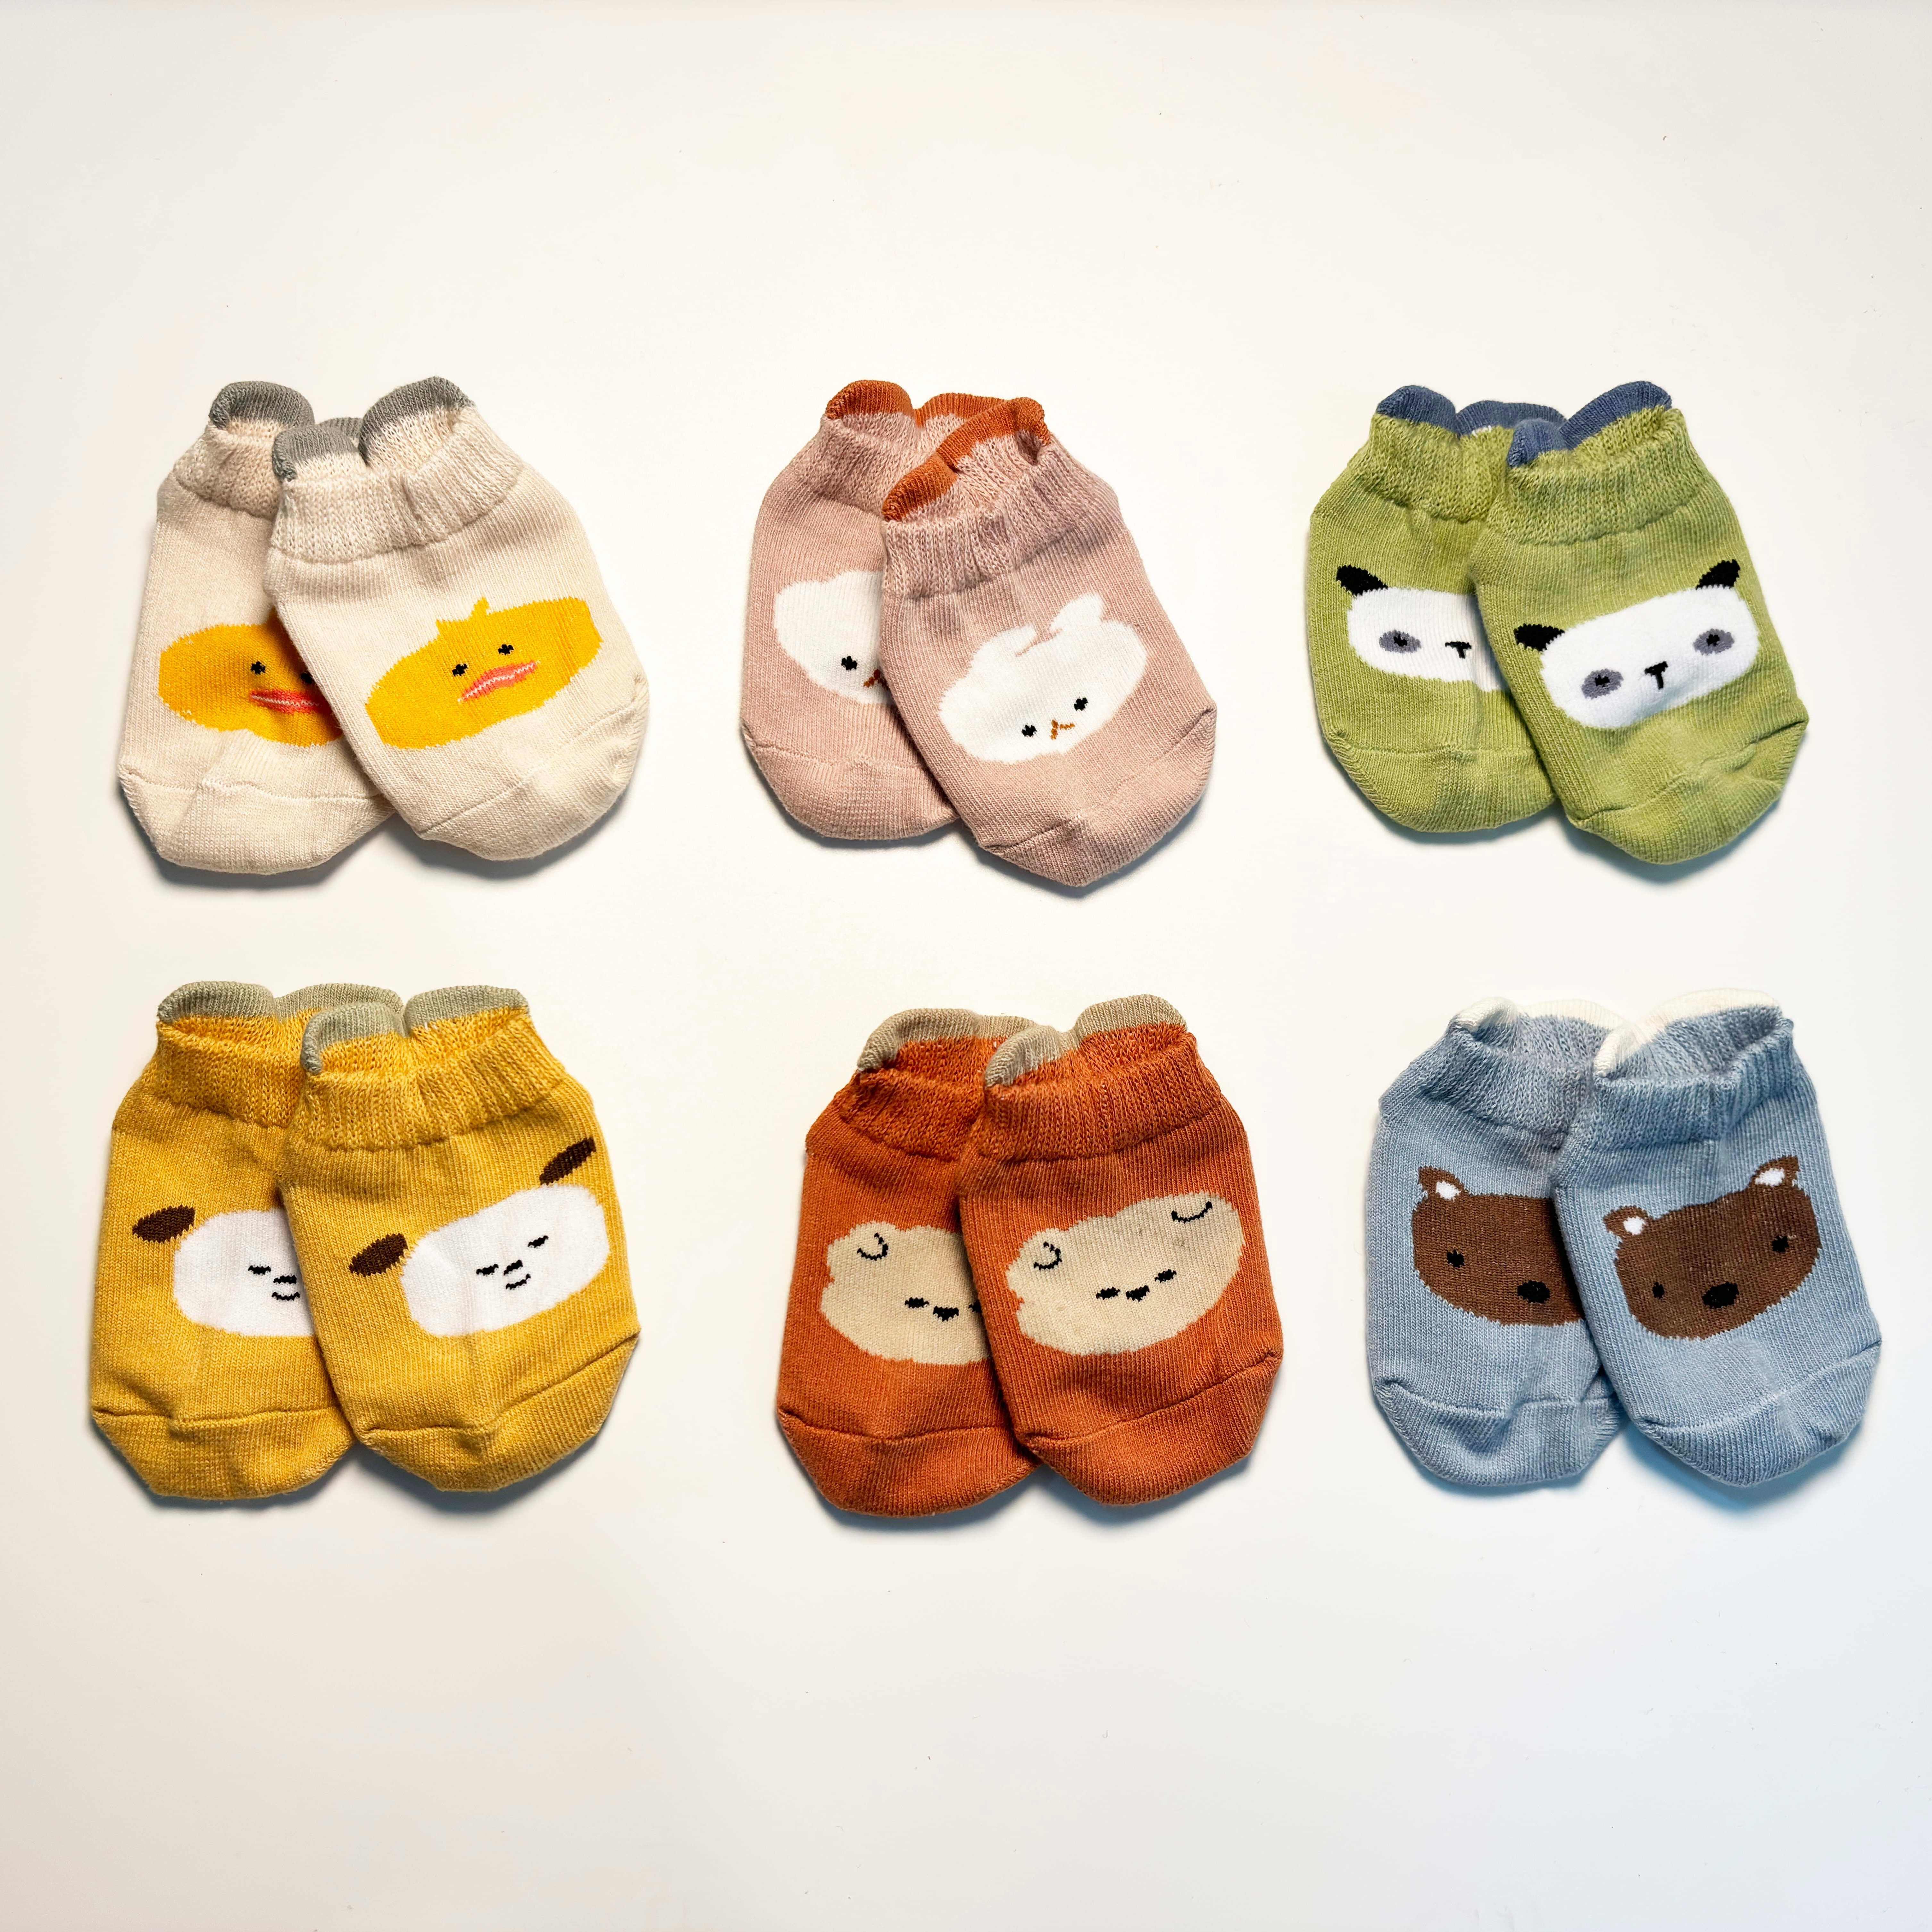 

6 Pairs Of Kid's Cotton Blend Fashion Cute Pattern Low-cut Socks, Comfy Breathable Soft Non-slip Floor Socks For Daily Wearing, Indoor Wearing